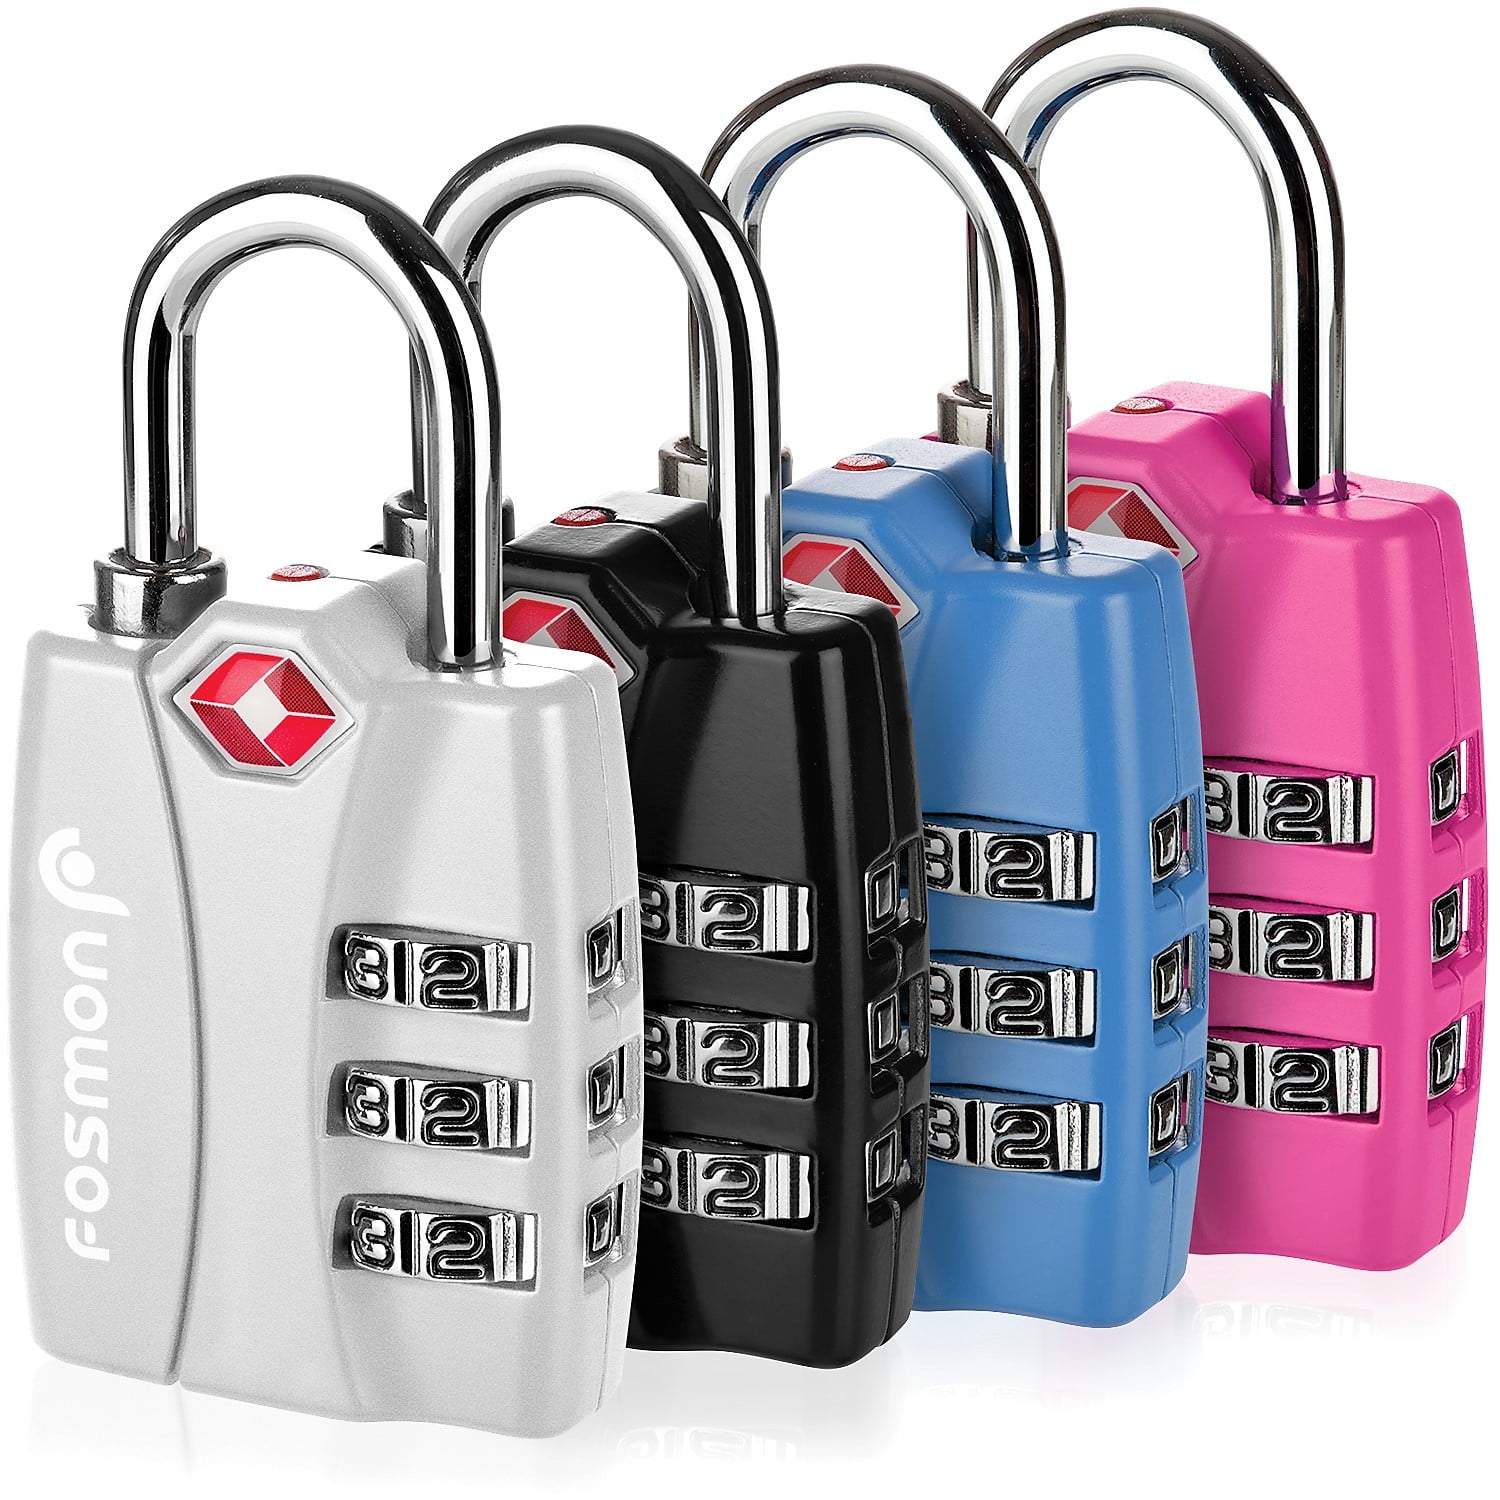 Fosmon - TSA Approved Luggage Locks, Fosmon 4 Pack 3 Digit Combination for Travel Bag, Suit Case ...